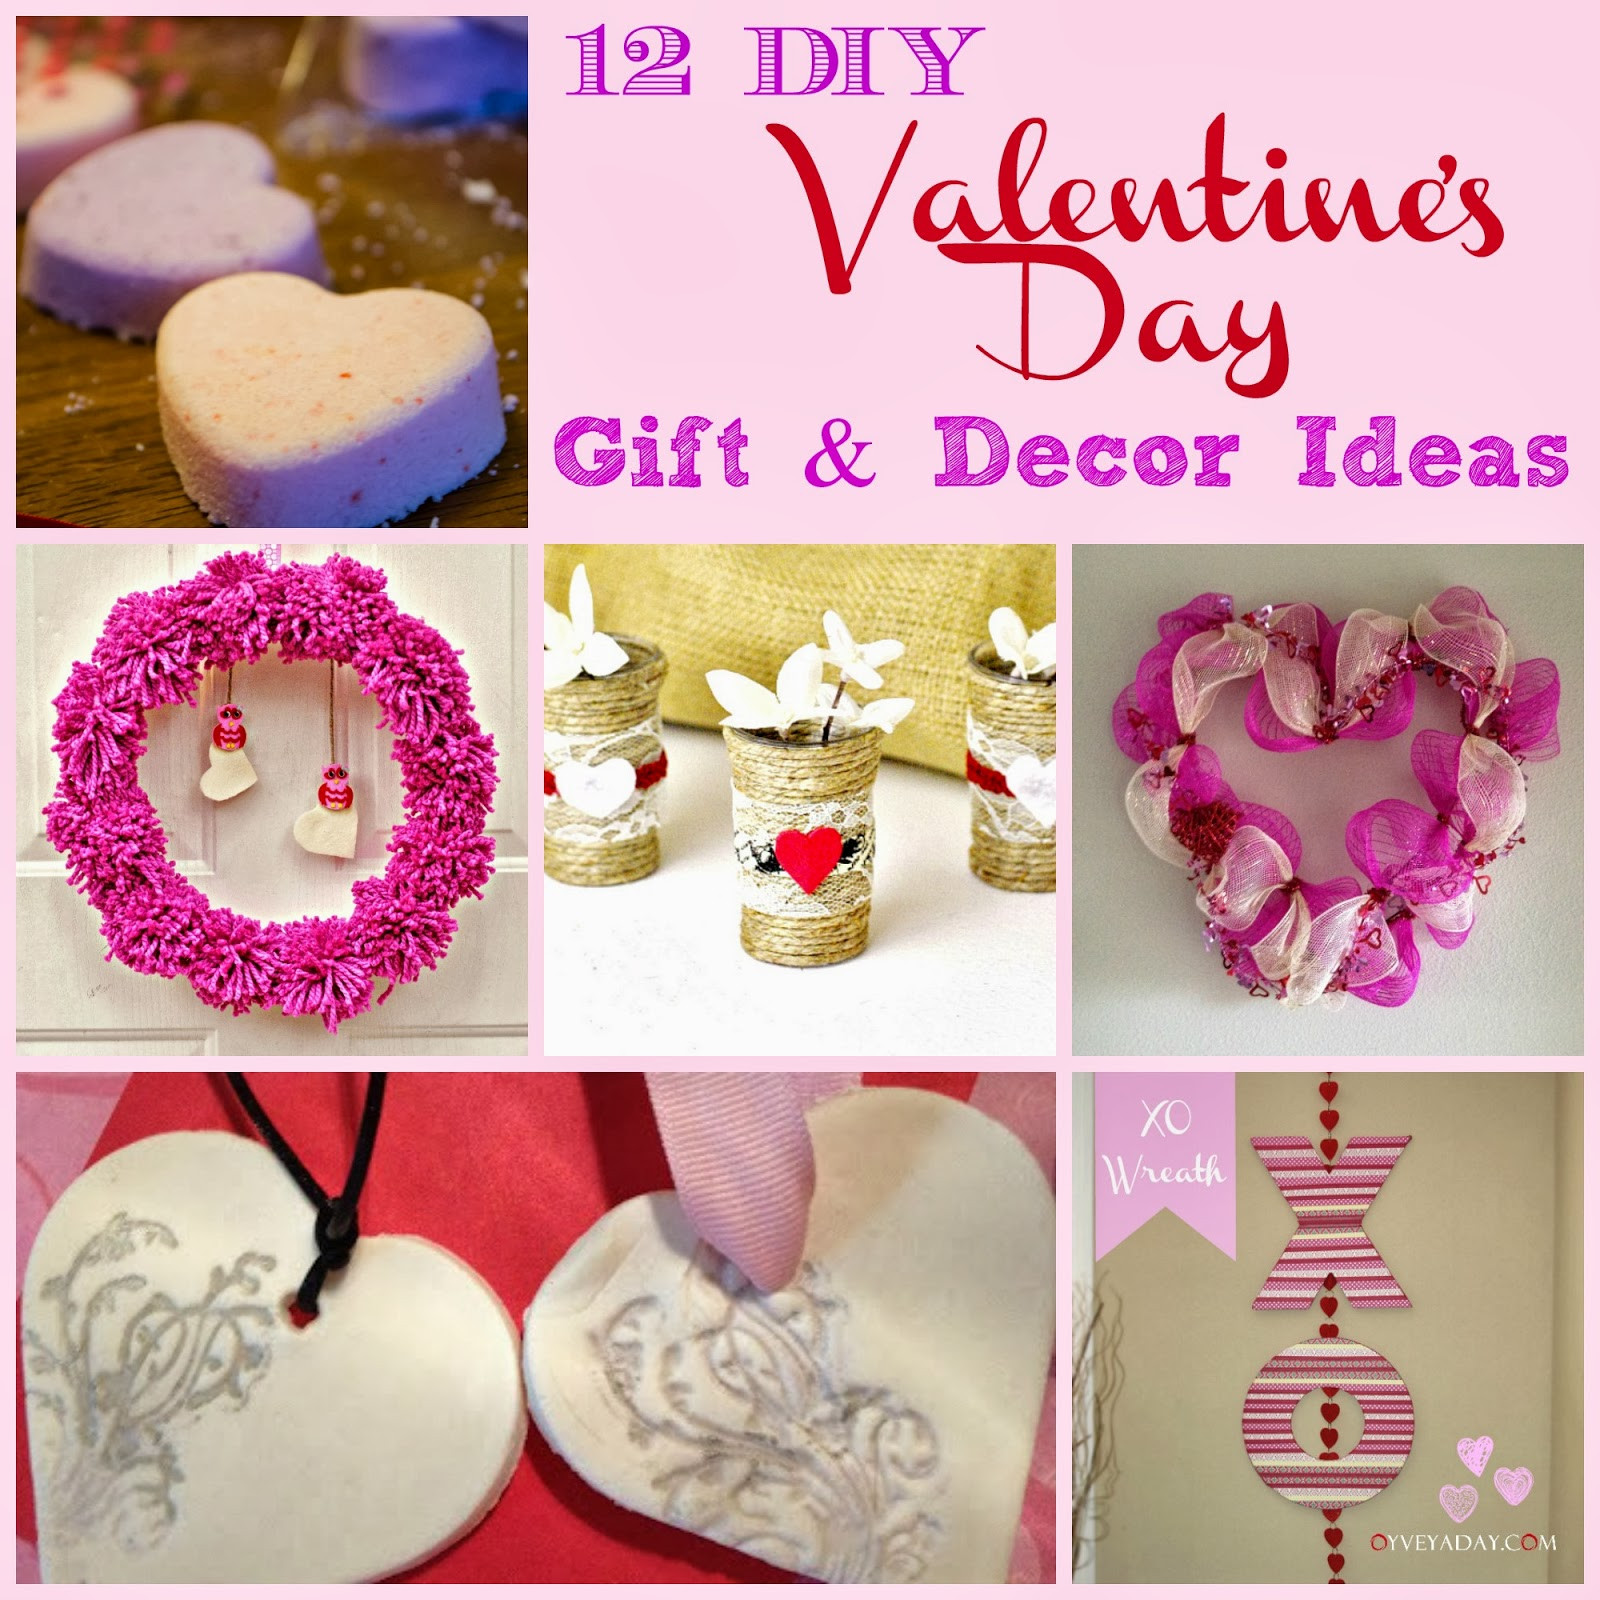 Valentine'S Day Gift Ideas
 12 DIY Valentine s Day Gift & Decor Ideas Outnumbered 3 to 1